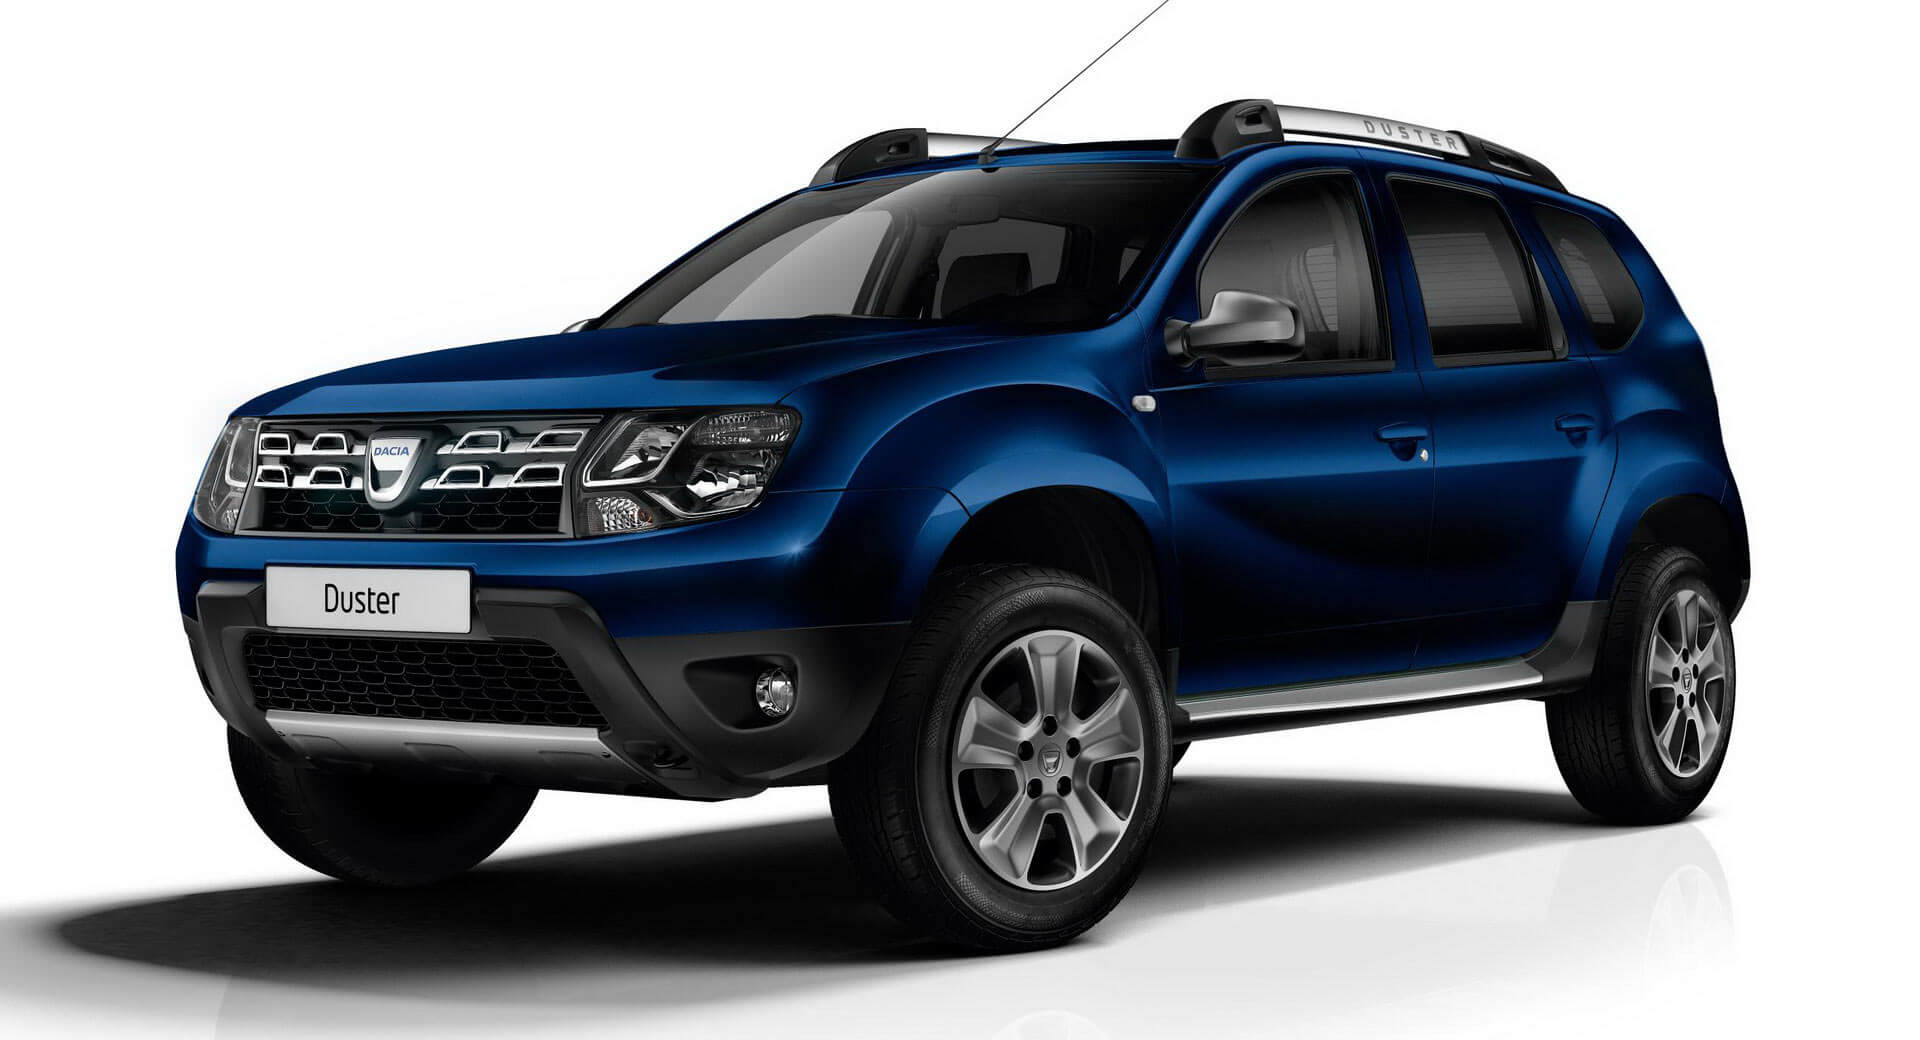 Dacia Duster 1.6 SCe 2WD review, Car review